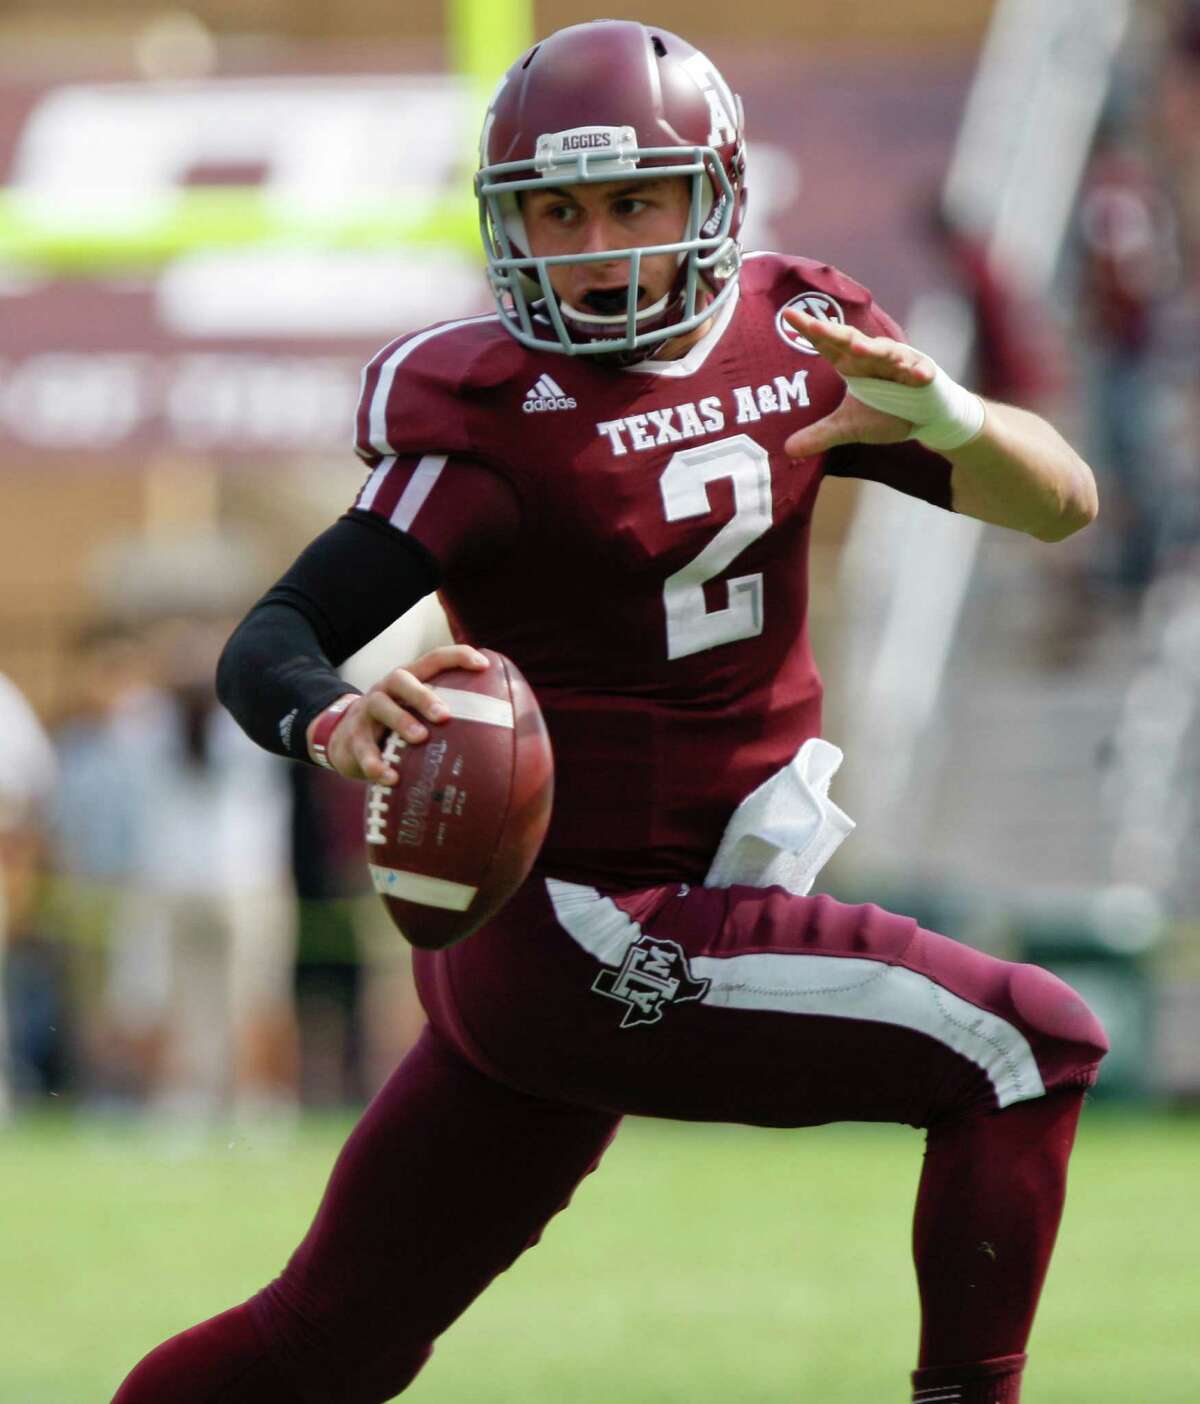 That guy again: Oklahoma defenders claim they're tired of hearing about Heisman Trophy winner "Johnny Football." They'll take any opportunity to aggressively tackle Johnny Manziel and try and knock the wind out of the confident QB early.